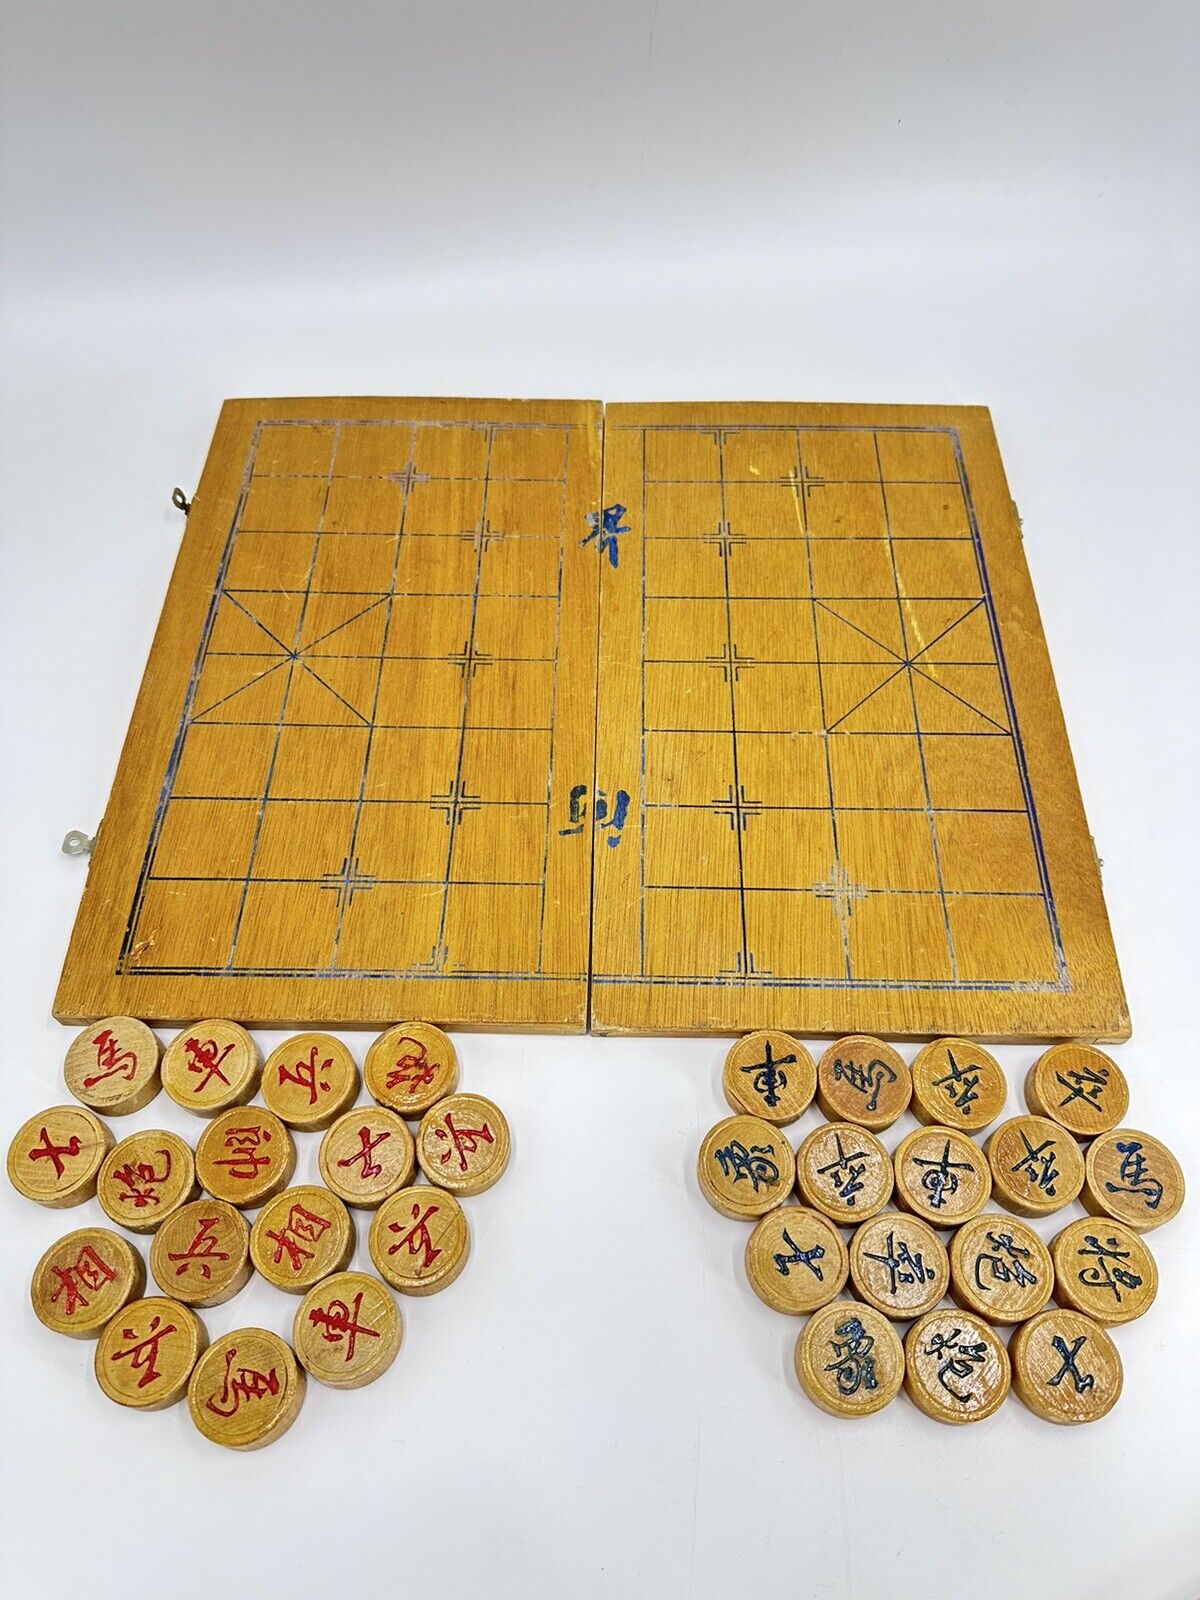 Vintage Chinese Chess Board Xiangqi Set, Game Board, Asian Chinese Wooden Chess